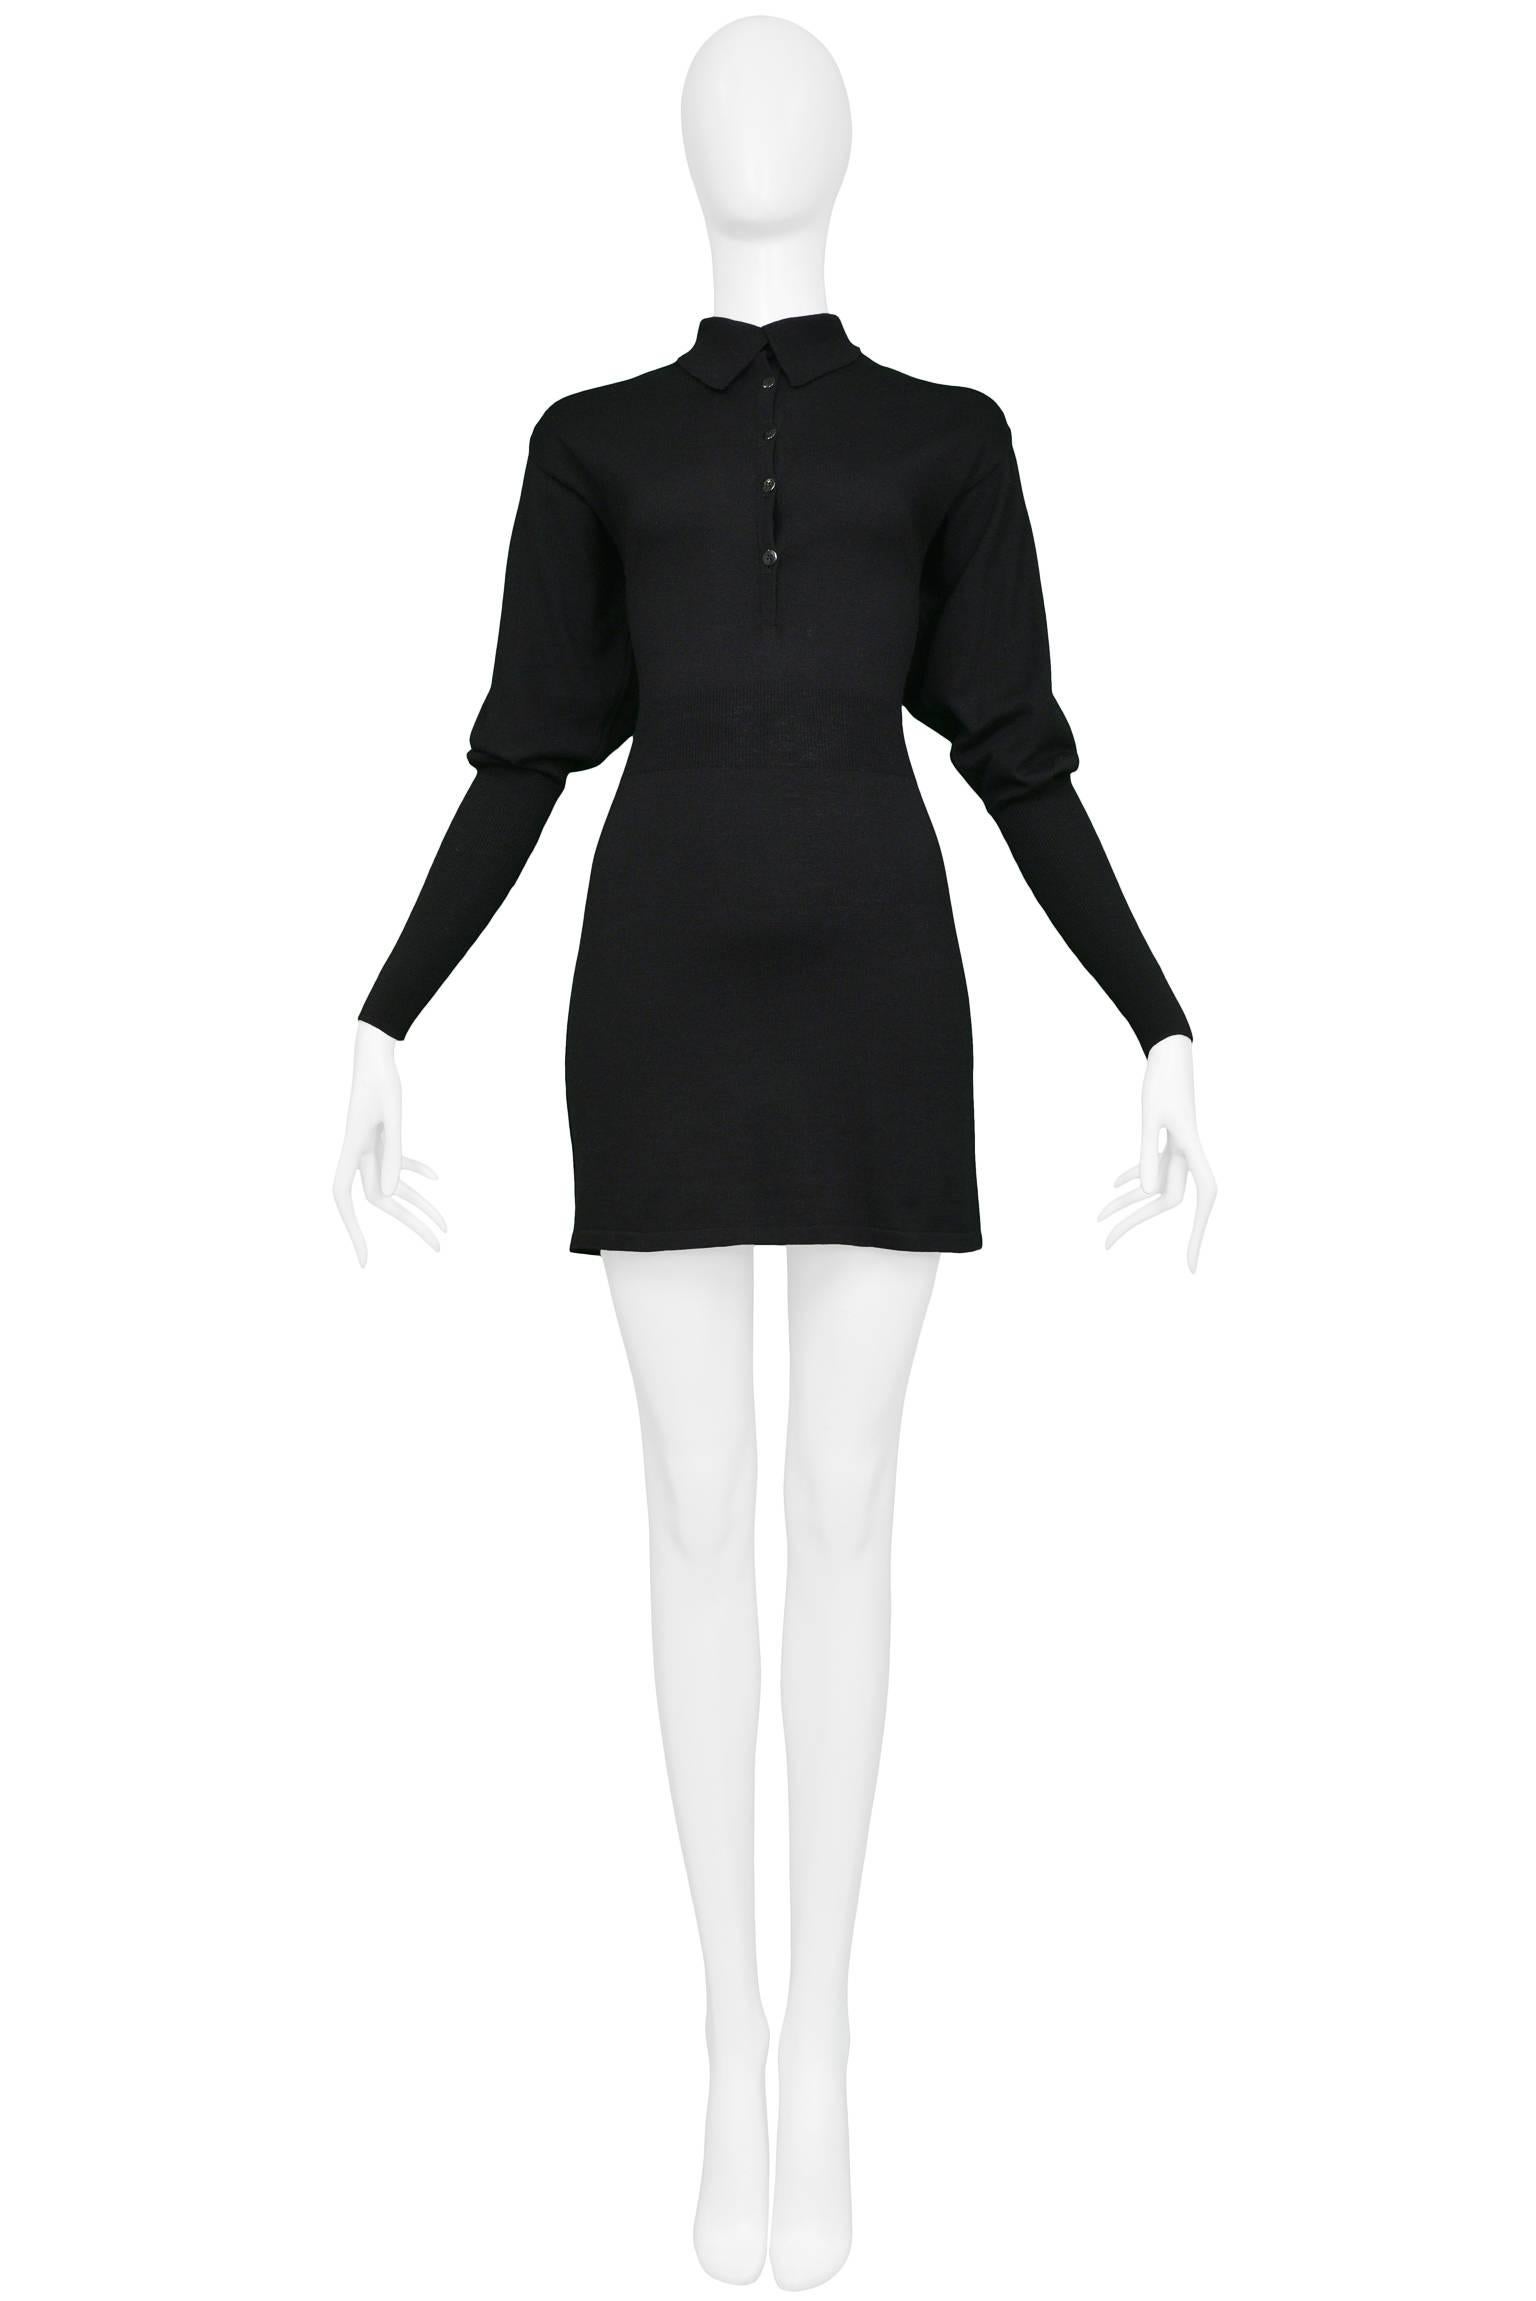 Vintage Azzedine Alaia black wool knit dress. Featuring blouson sleeves and buttons ascending down from the collar. This dress has knit ribbing to cinch in the waist. 